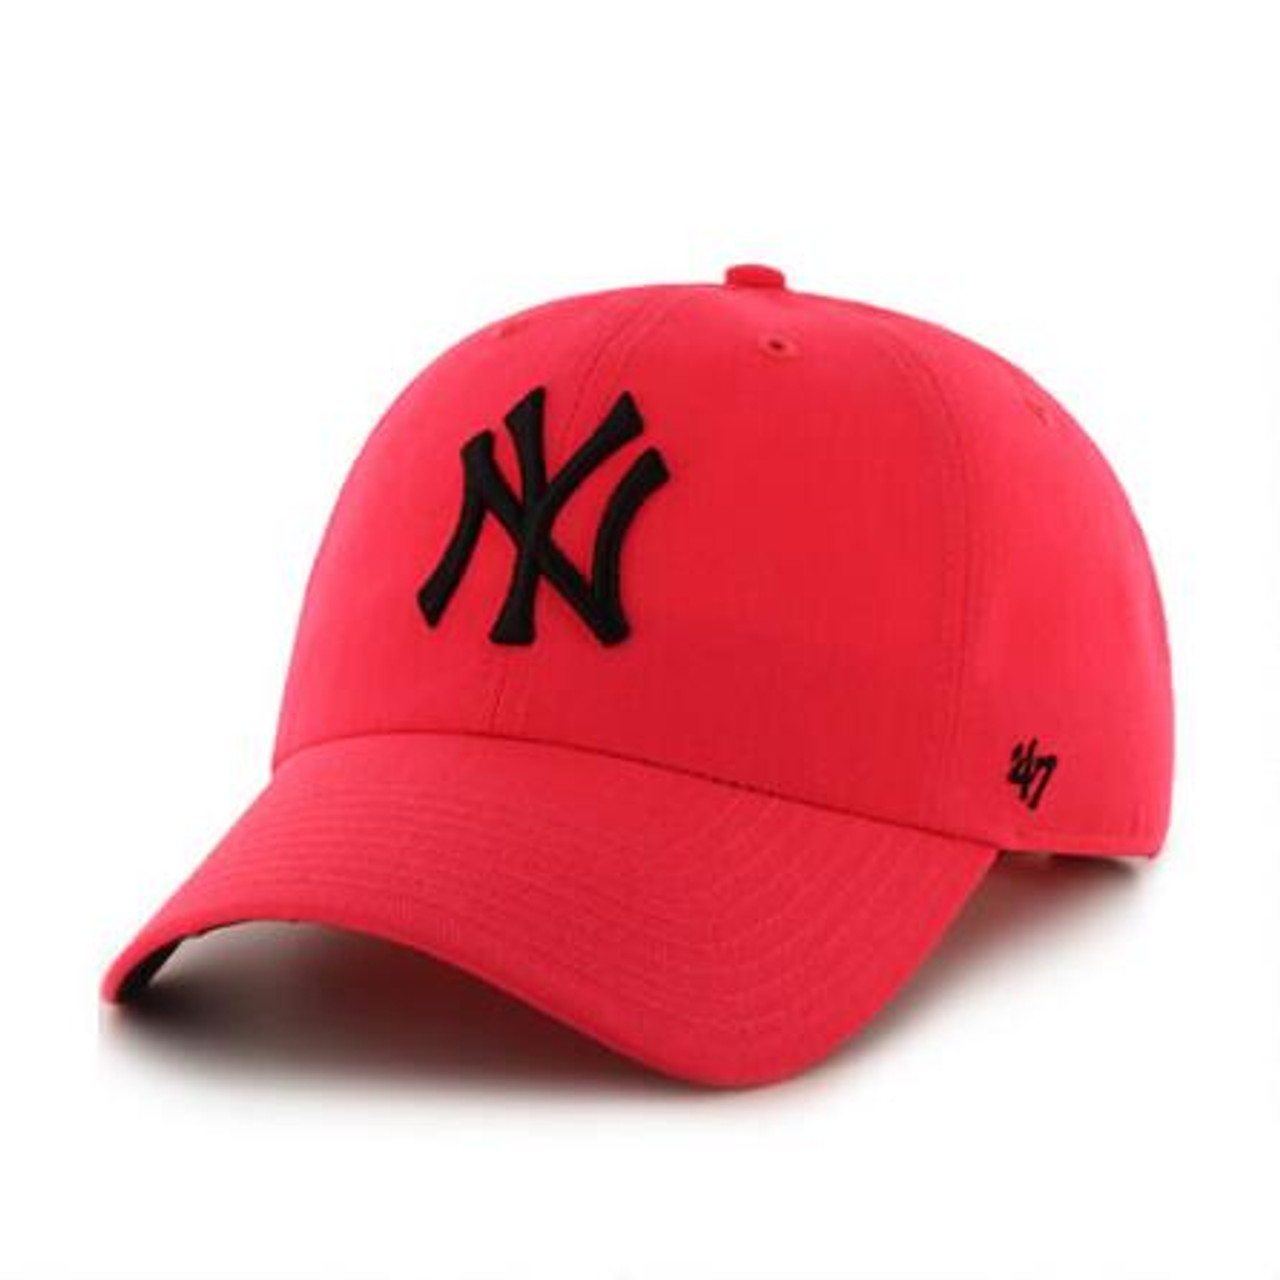 New Era NY Yankees Cap In Pink - FREE* Shipping & Easy Returns